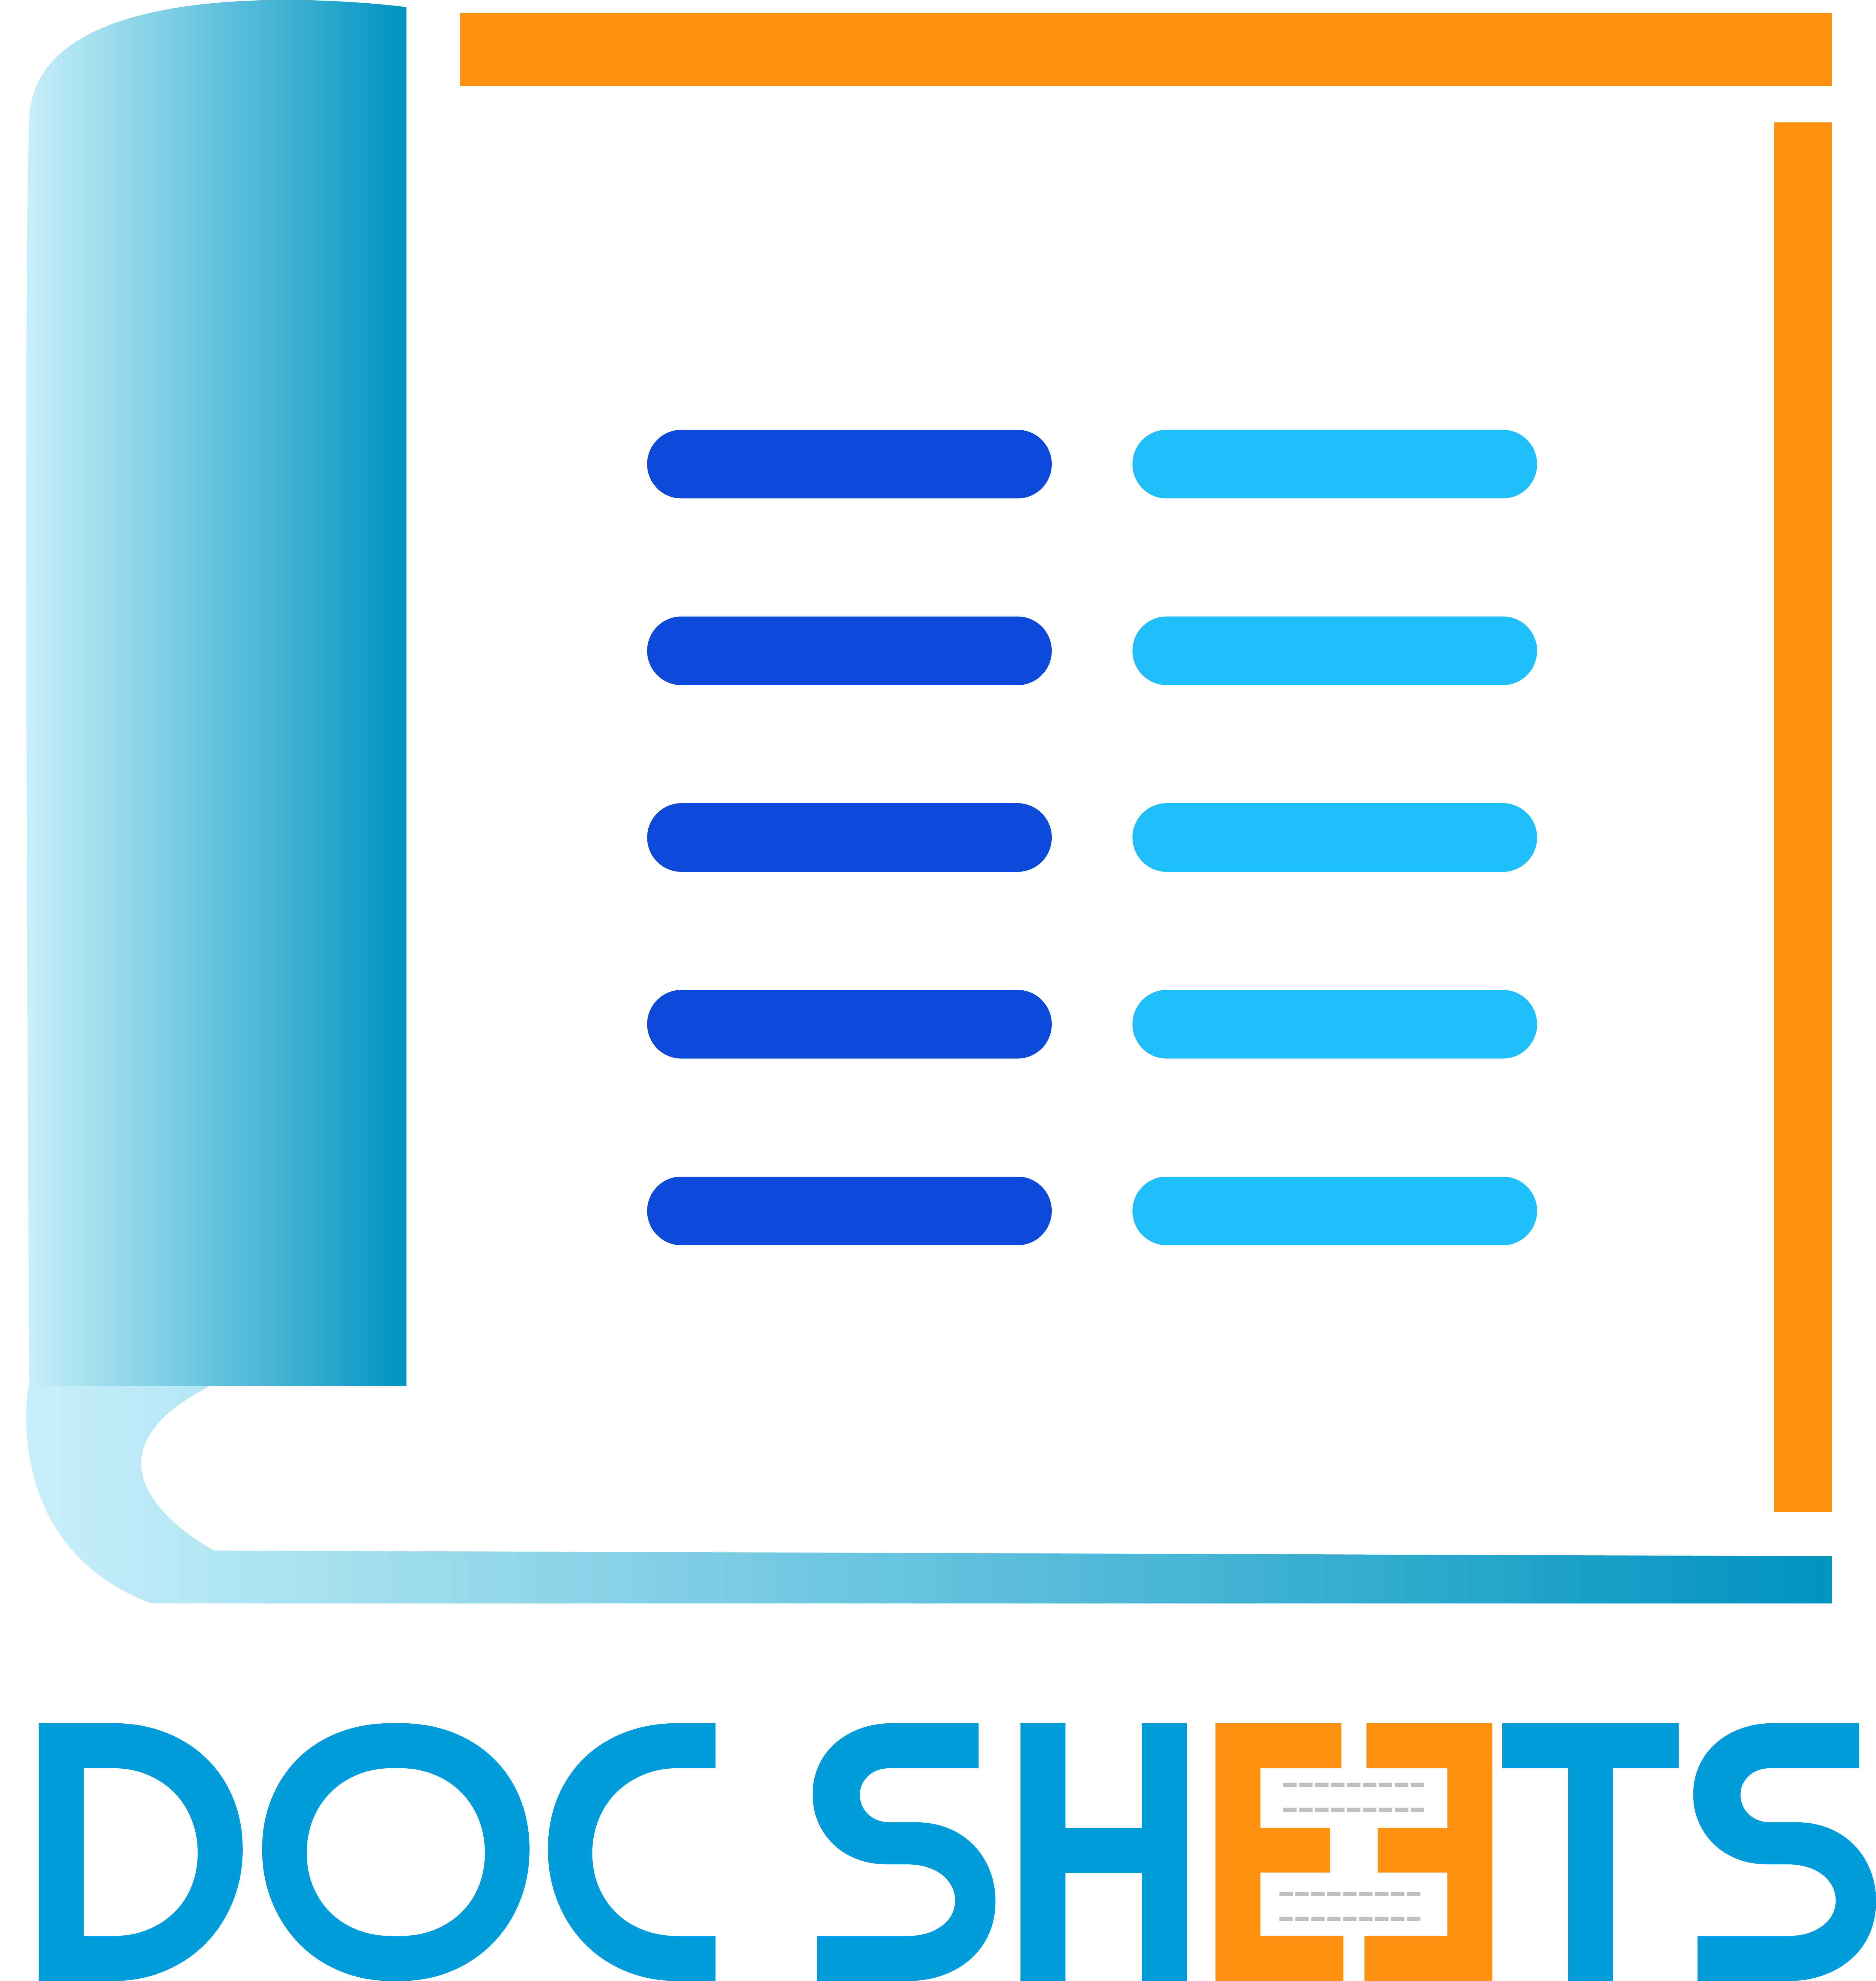 Doc Sheets has become one of the best lifecycle and requirements management tools